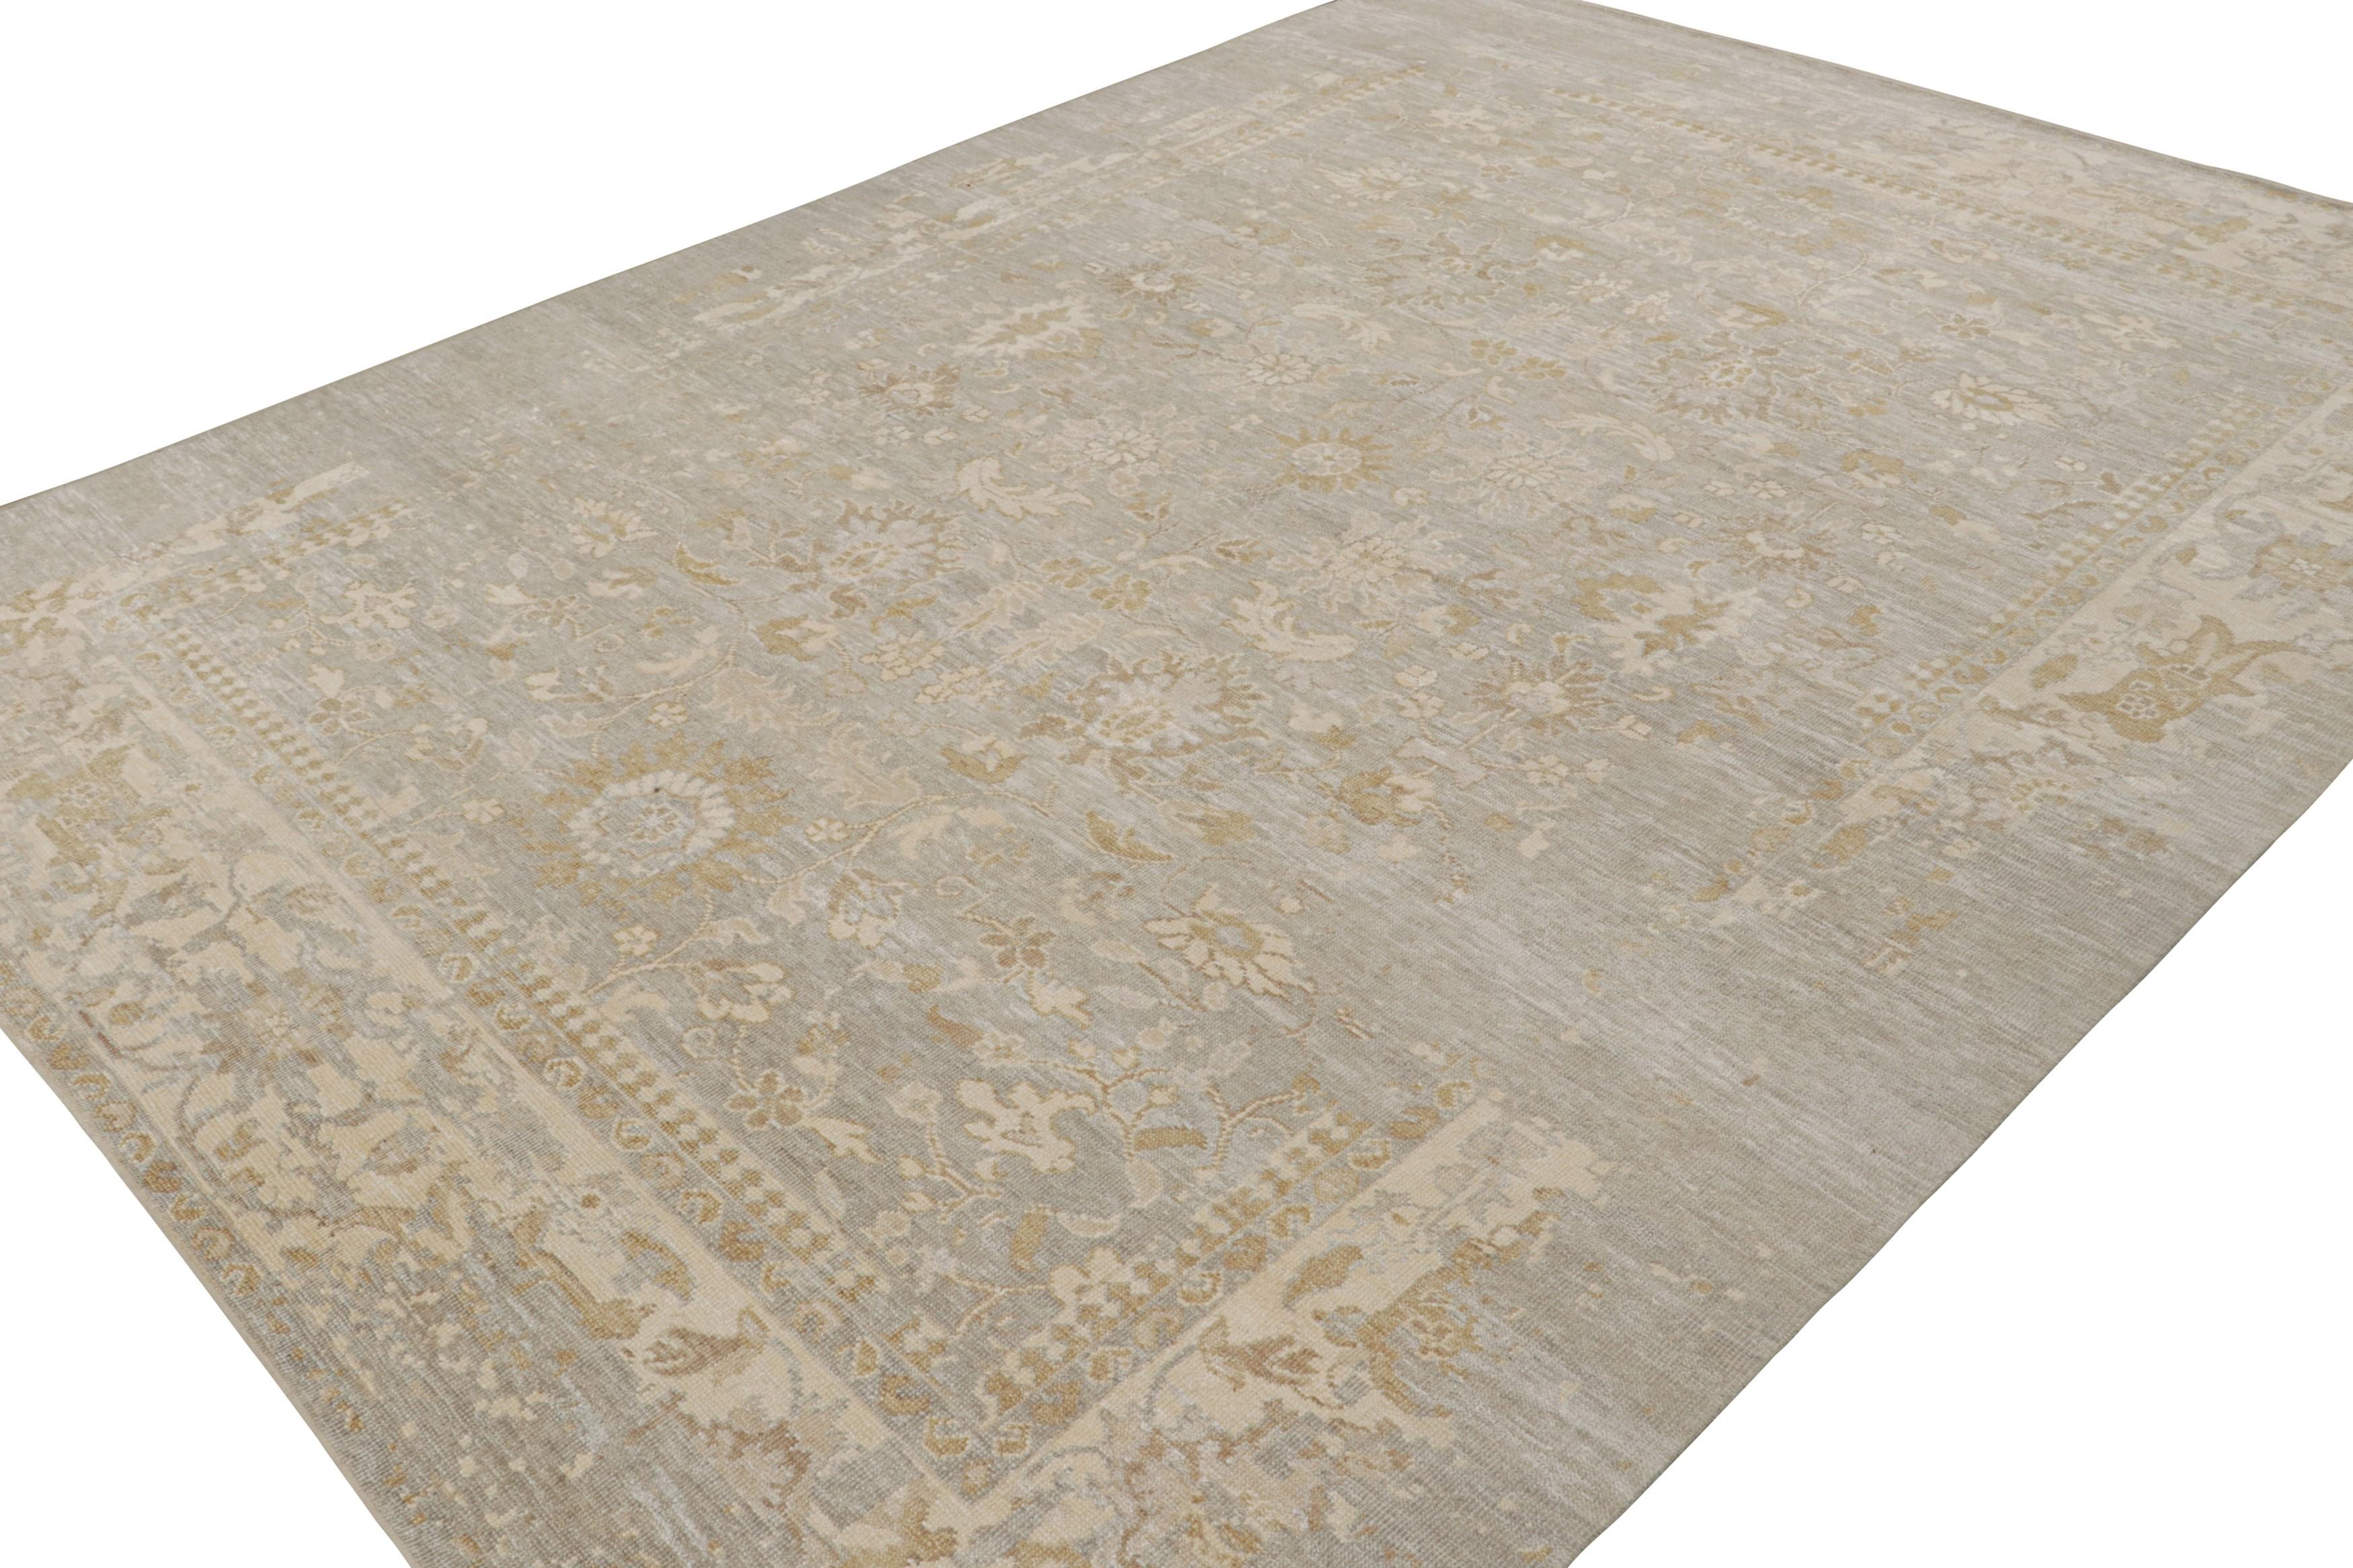 This 10x14 rug from the Modern Classics Collection by Rug & Kilim is from a new line inspired by antique Oushak rugs. Hand-knotted in wool & sari silk, its design enjoys beige, gold & gray floral patterns.  

On the Design: 

The rug is made with a